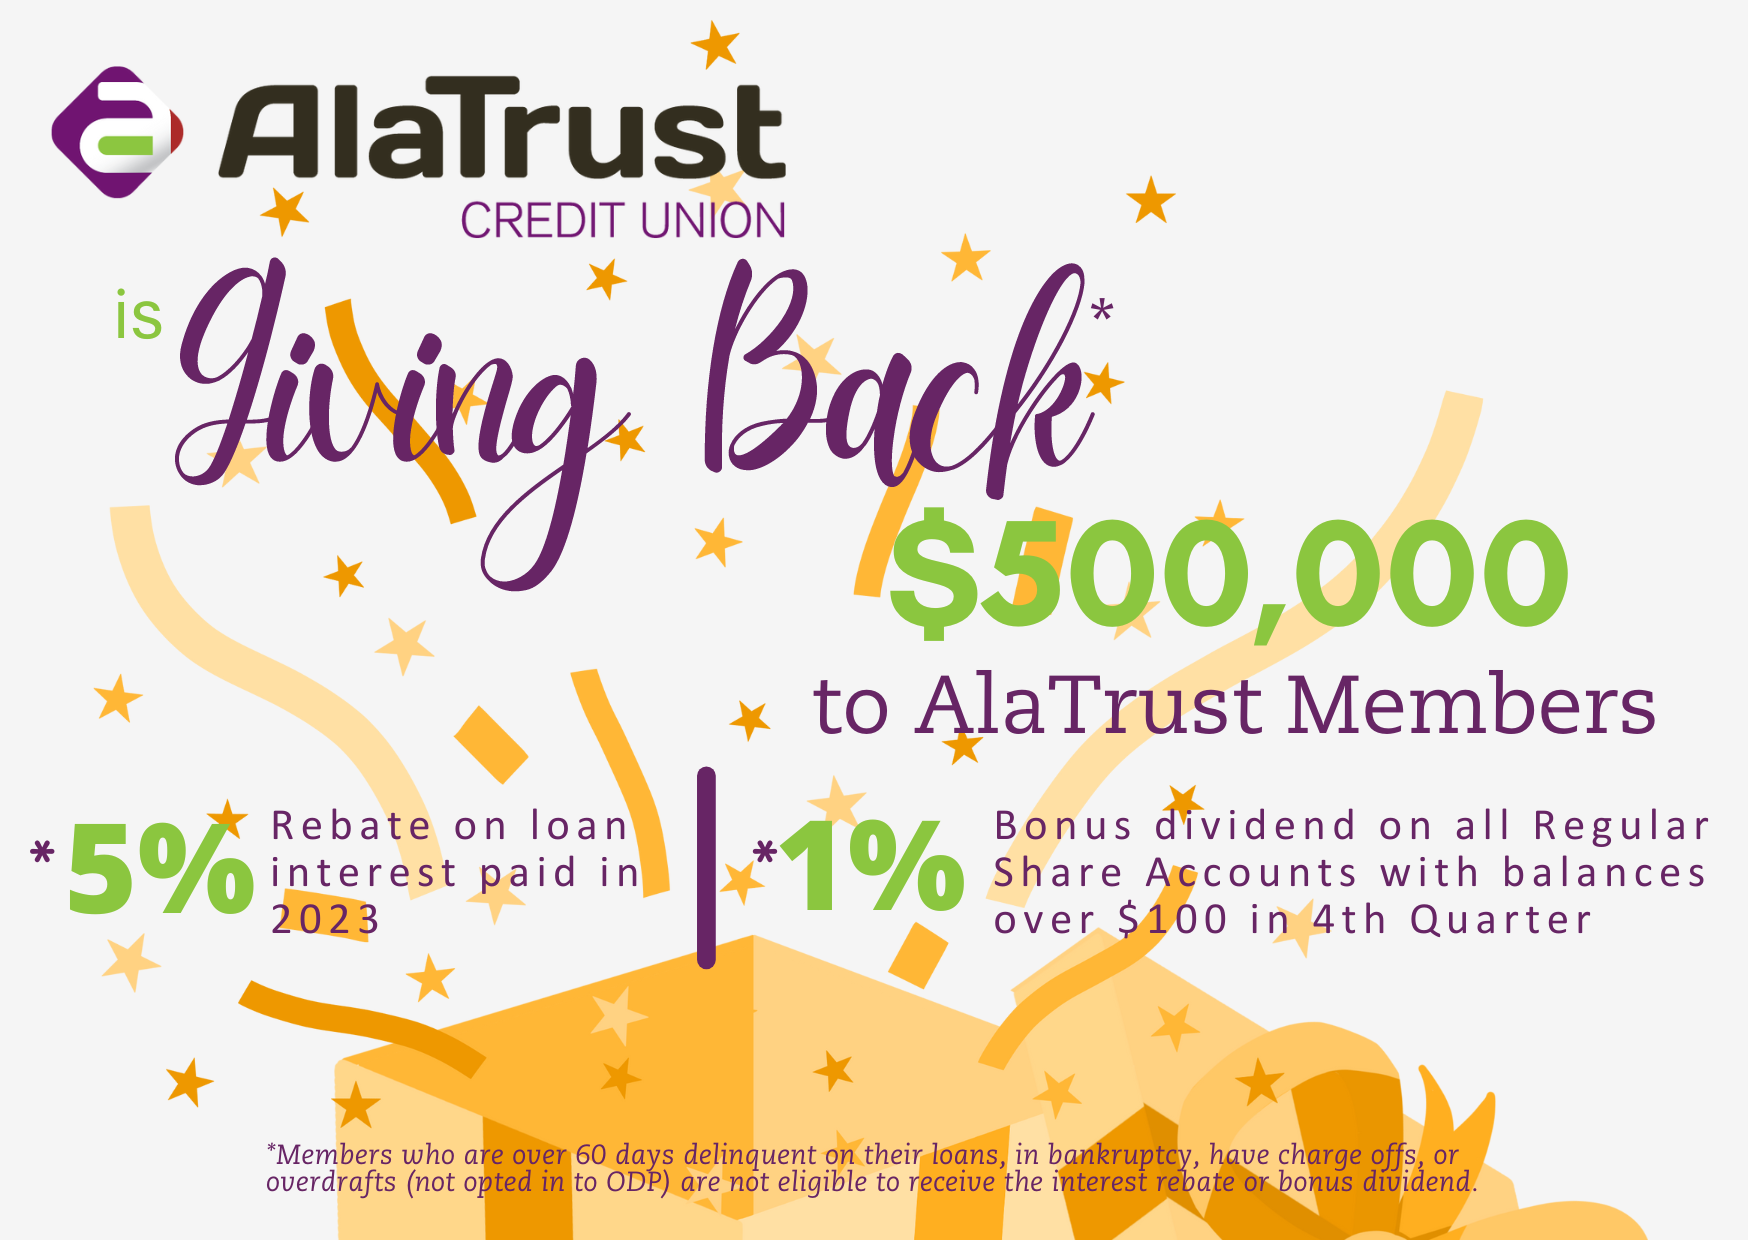 AlaTrust gives $500,000 BACK to members  